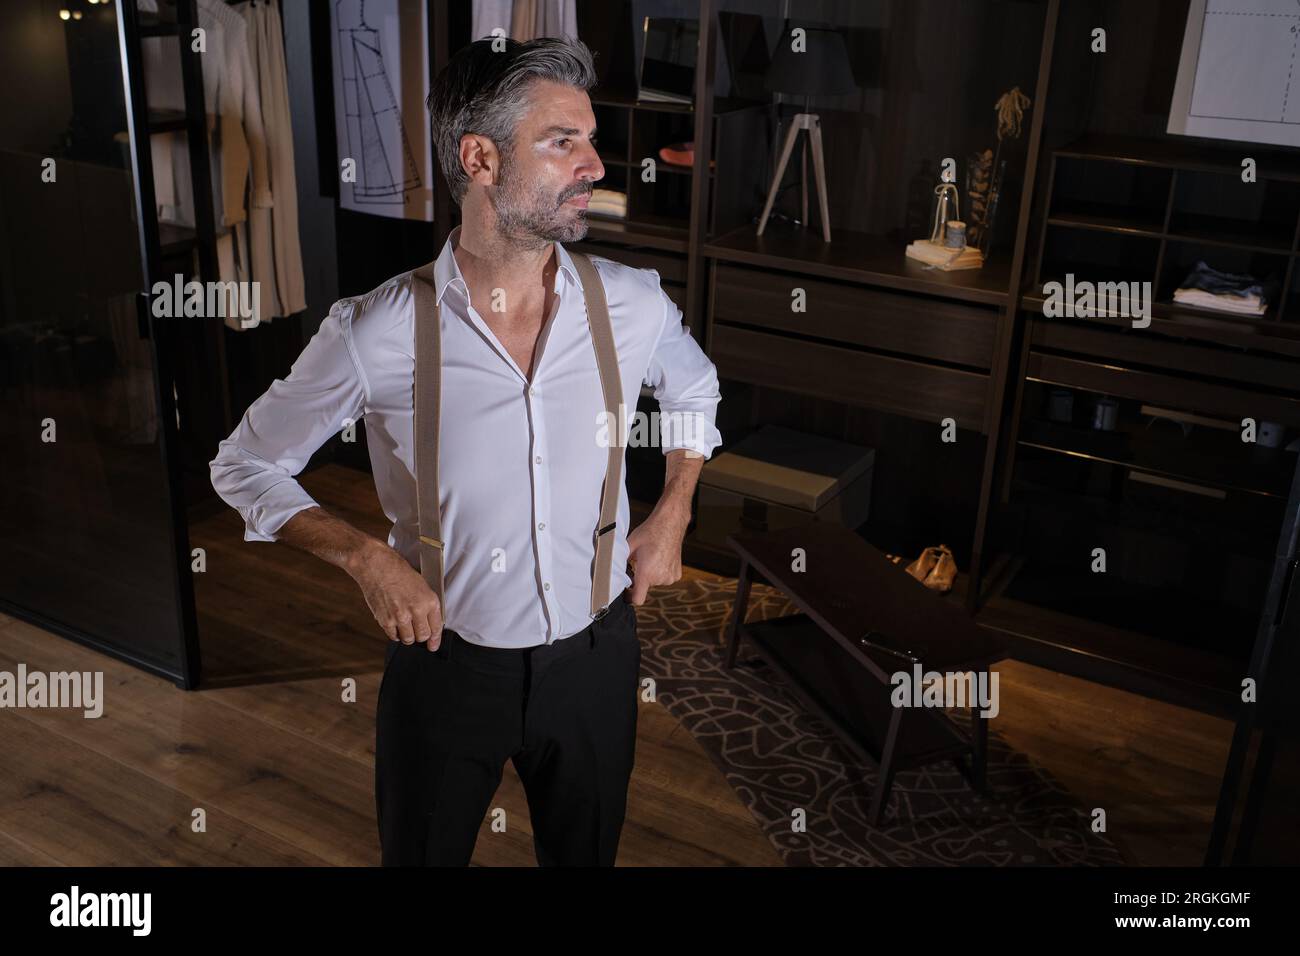 High angle of self assured unshaven Hispanic man in classy outfit looking away and standing with hands on waist against wooden shelves while having ti Stock Photo